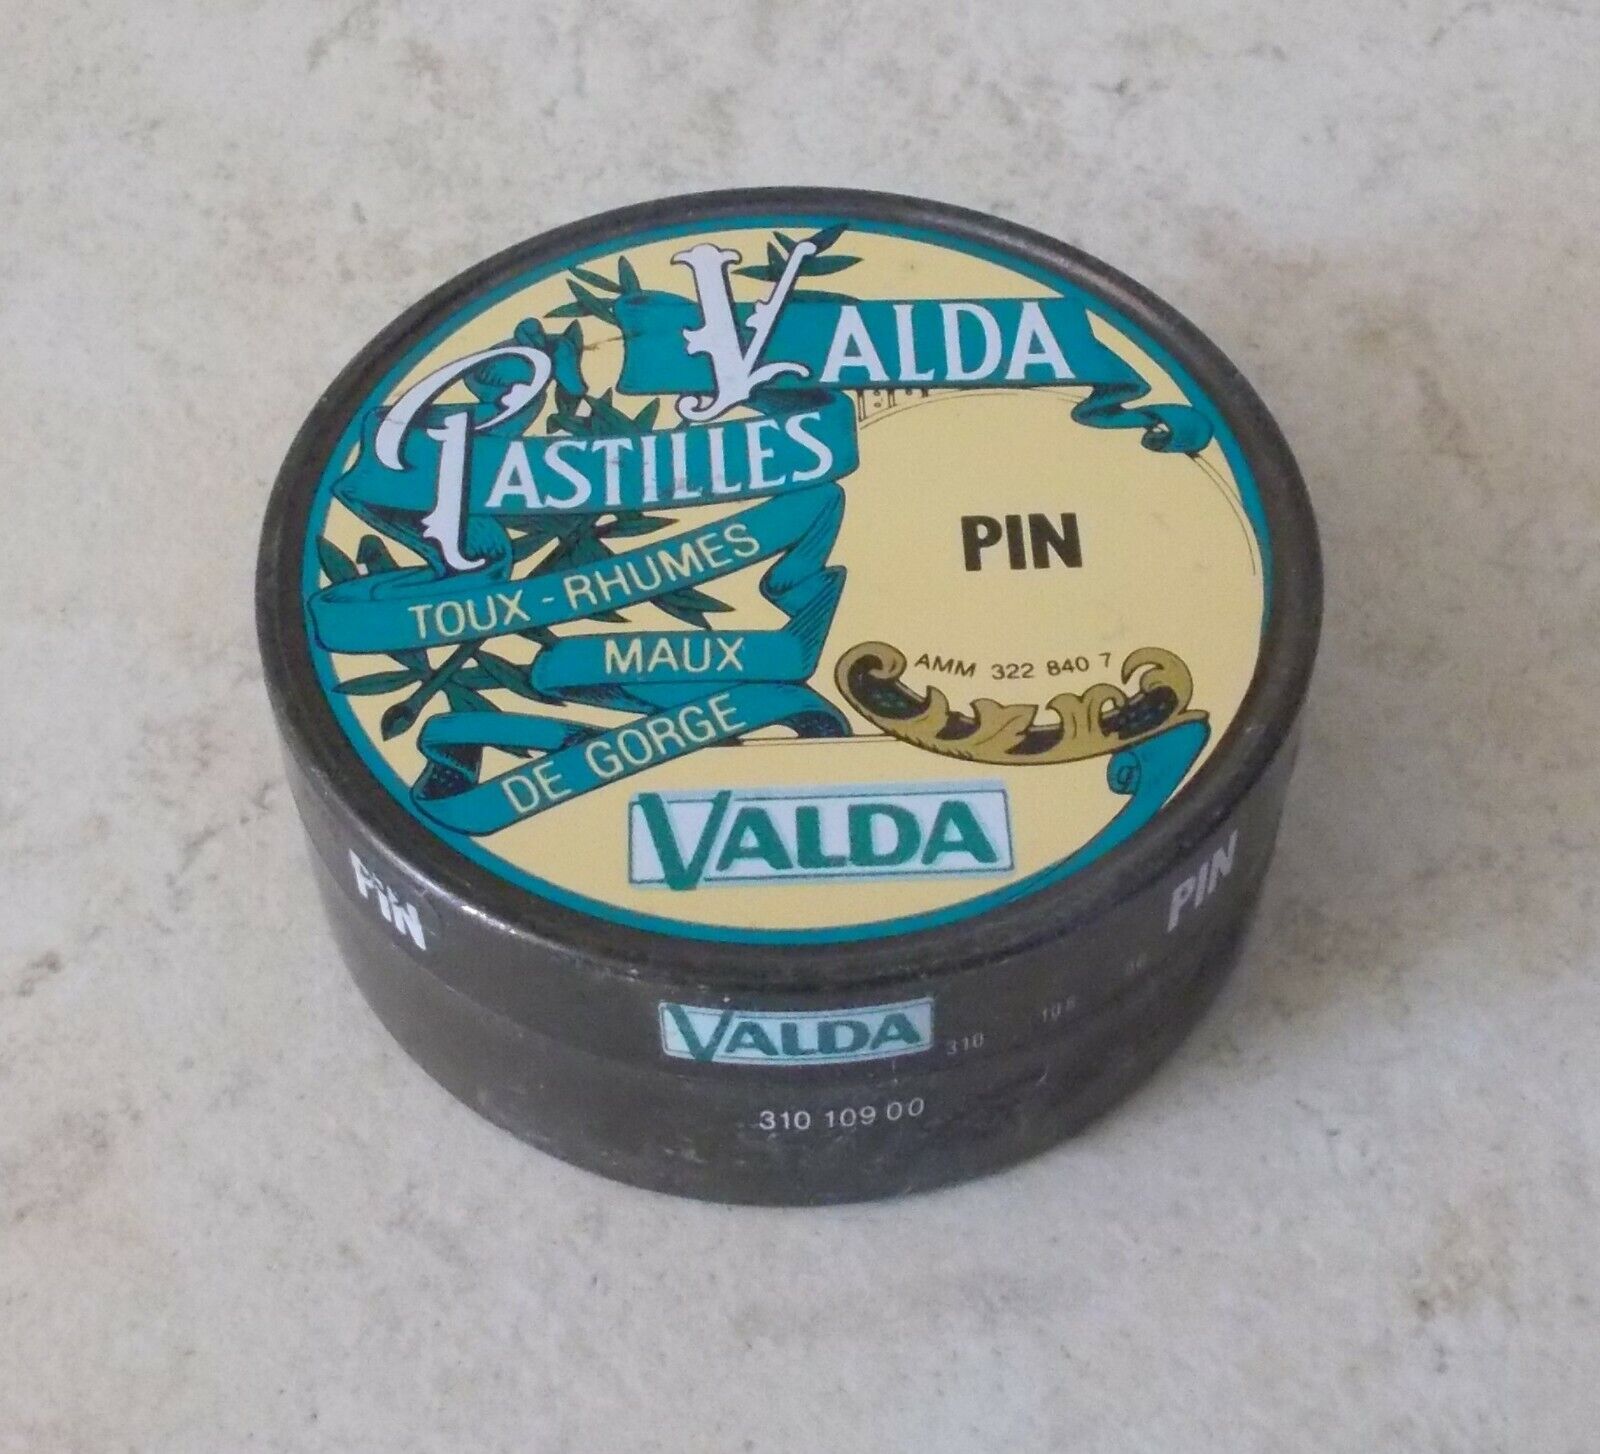 Vintage french candy Pastilles VALDA Advertising tin box France 1980s brown #3